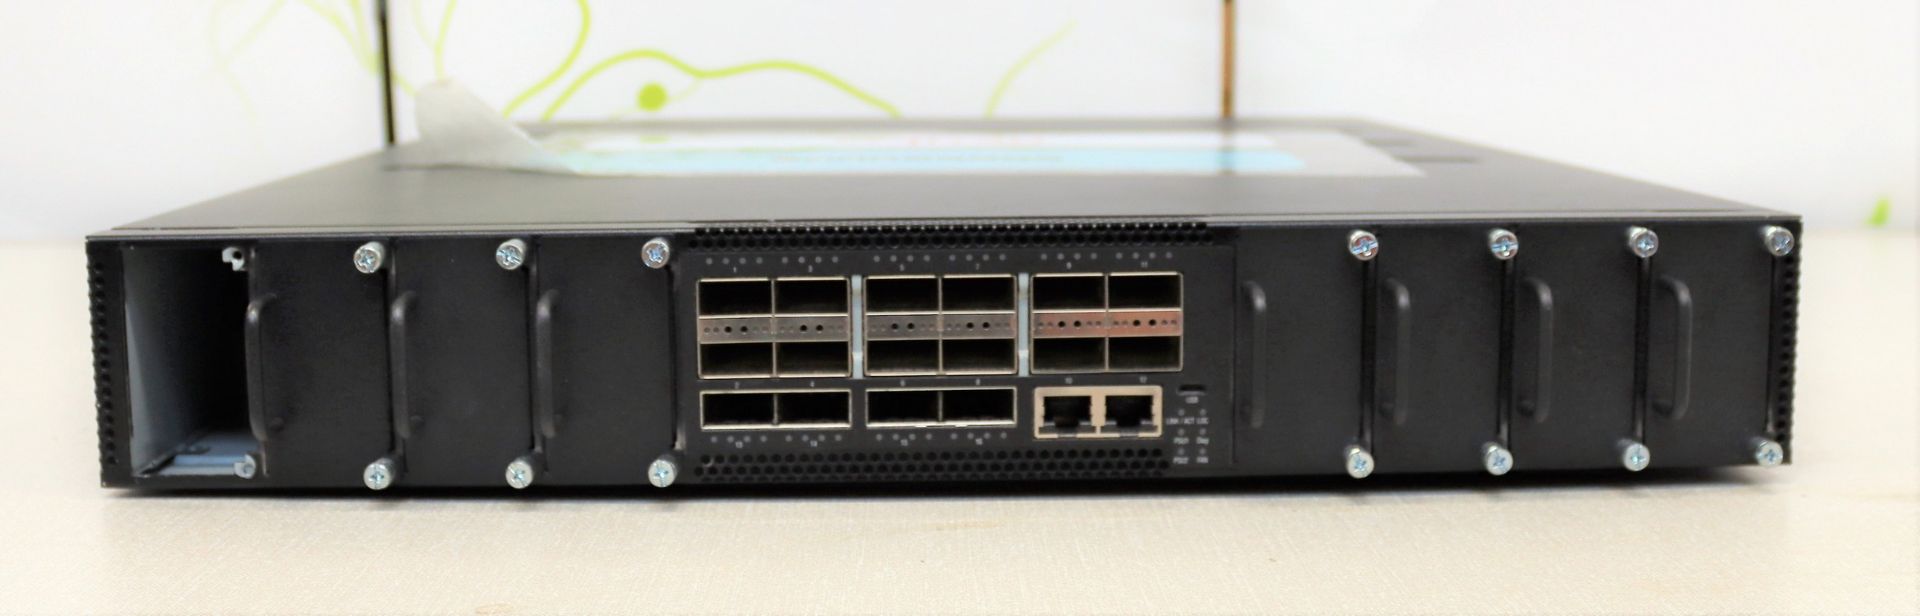 A boxed Edge-Core 100G rack mount Coherent Switch (possibly pre-owned)